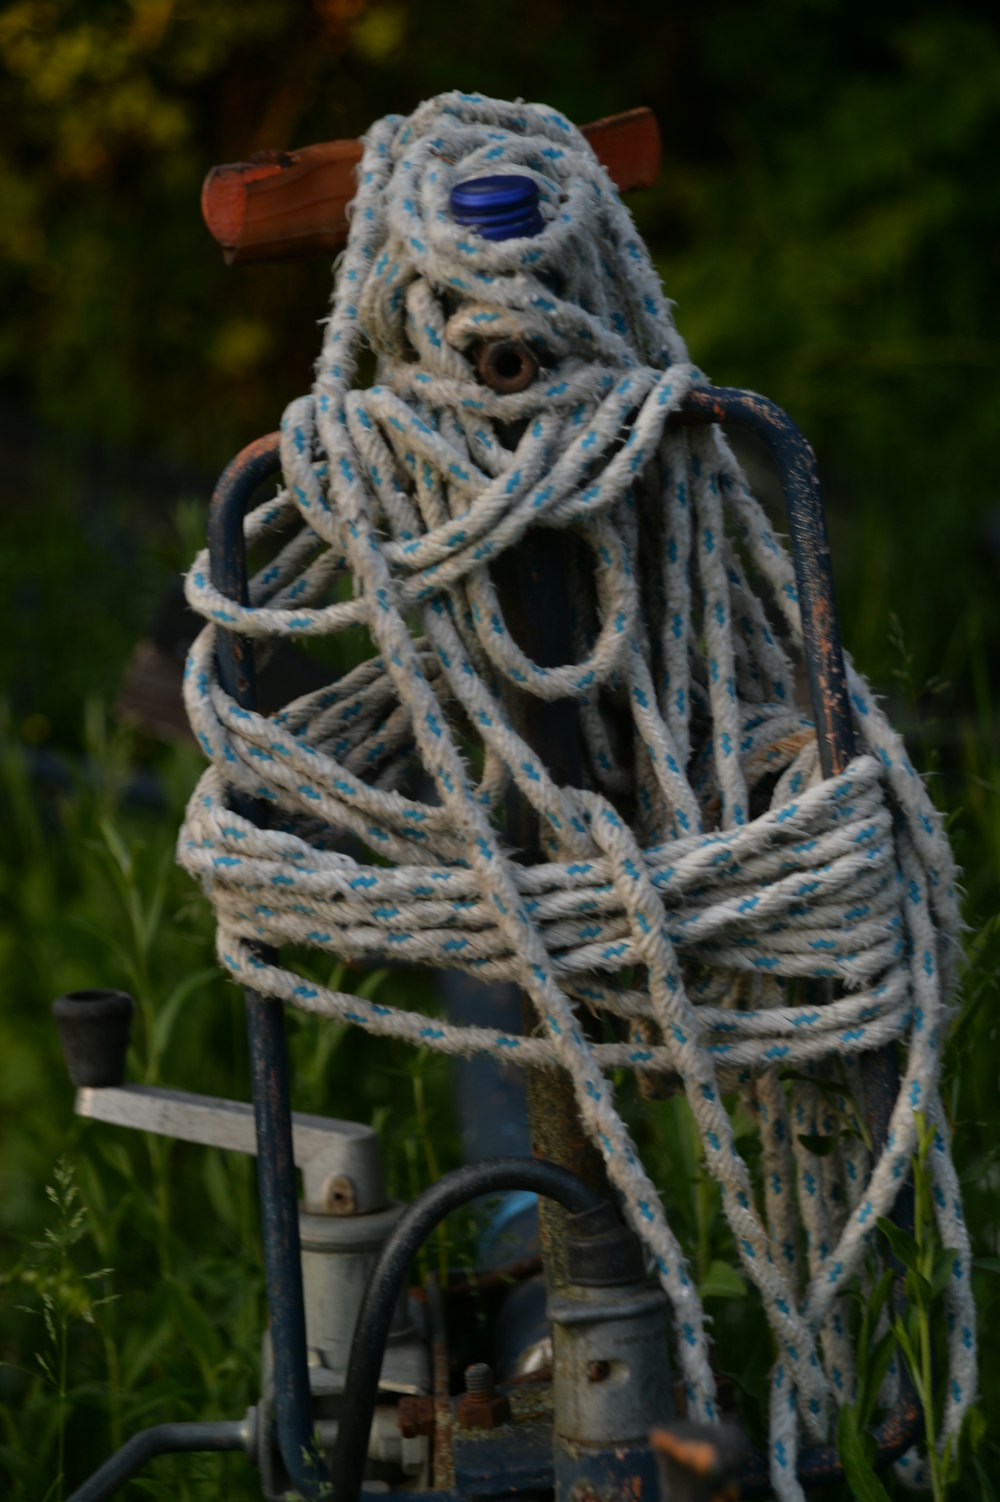 a close up of a rope on a machine